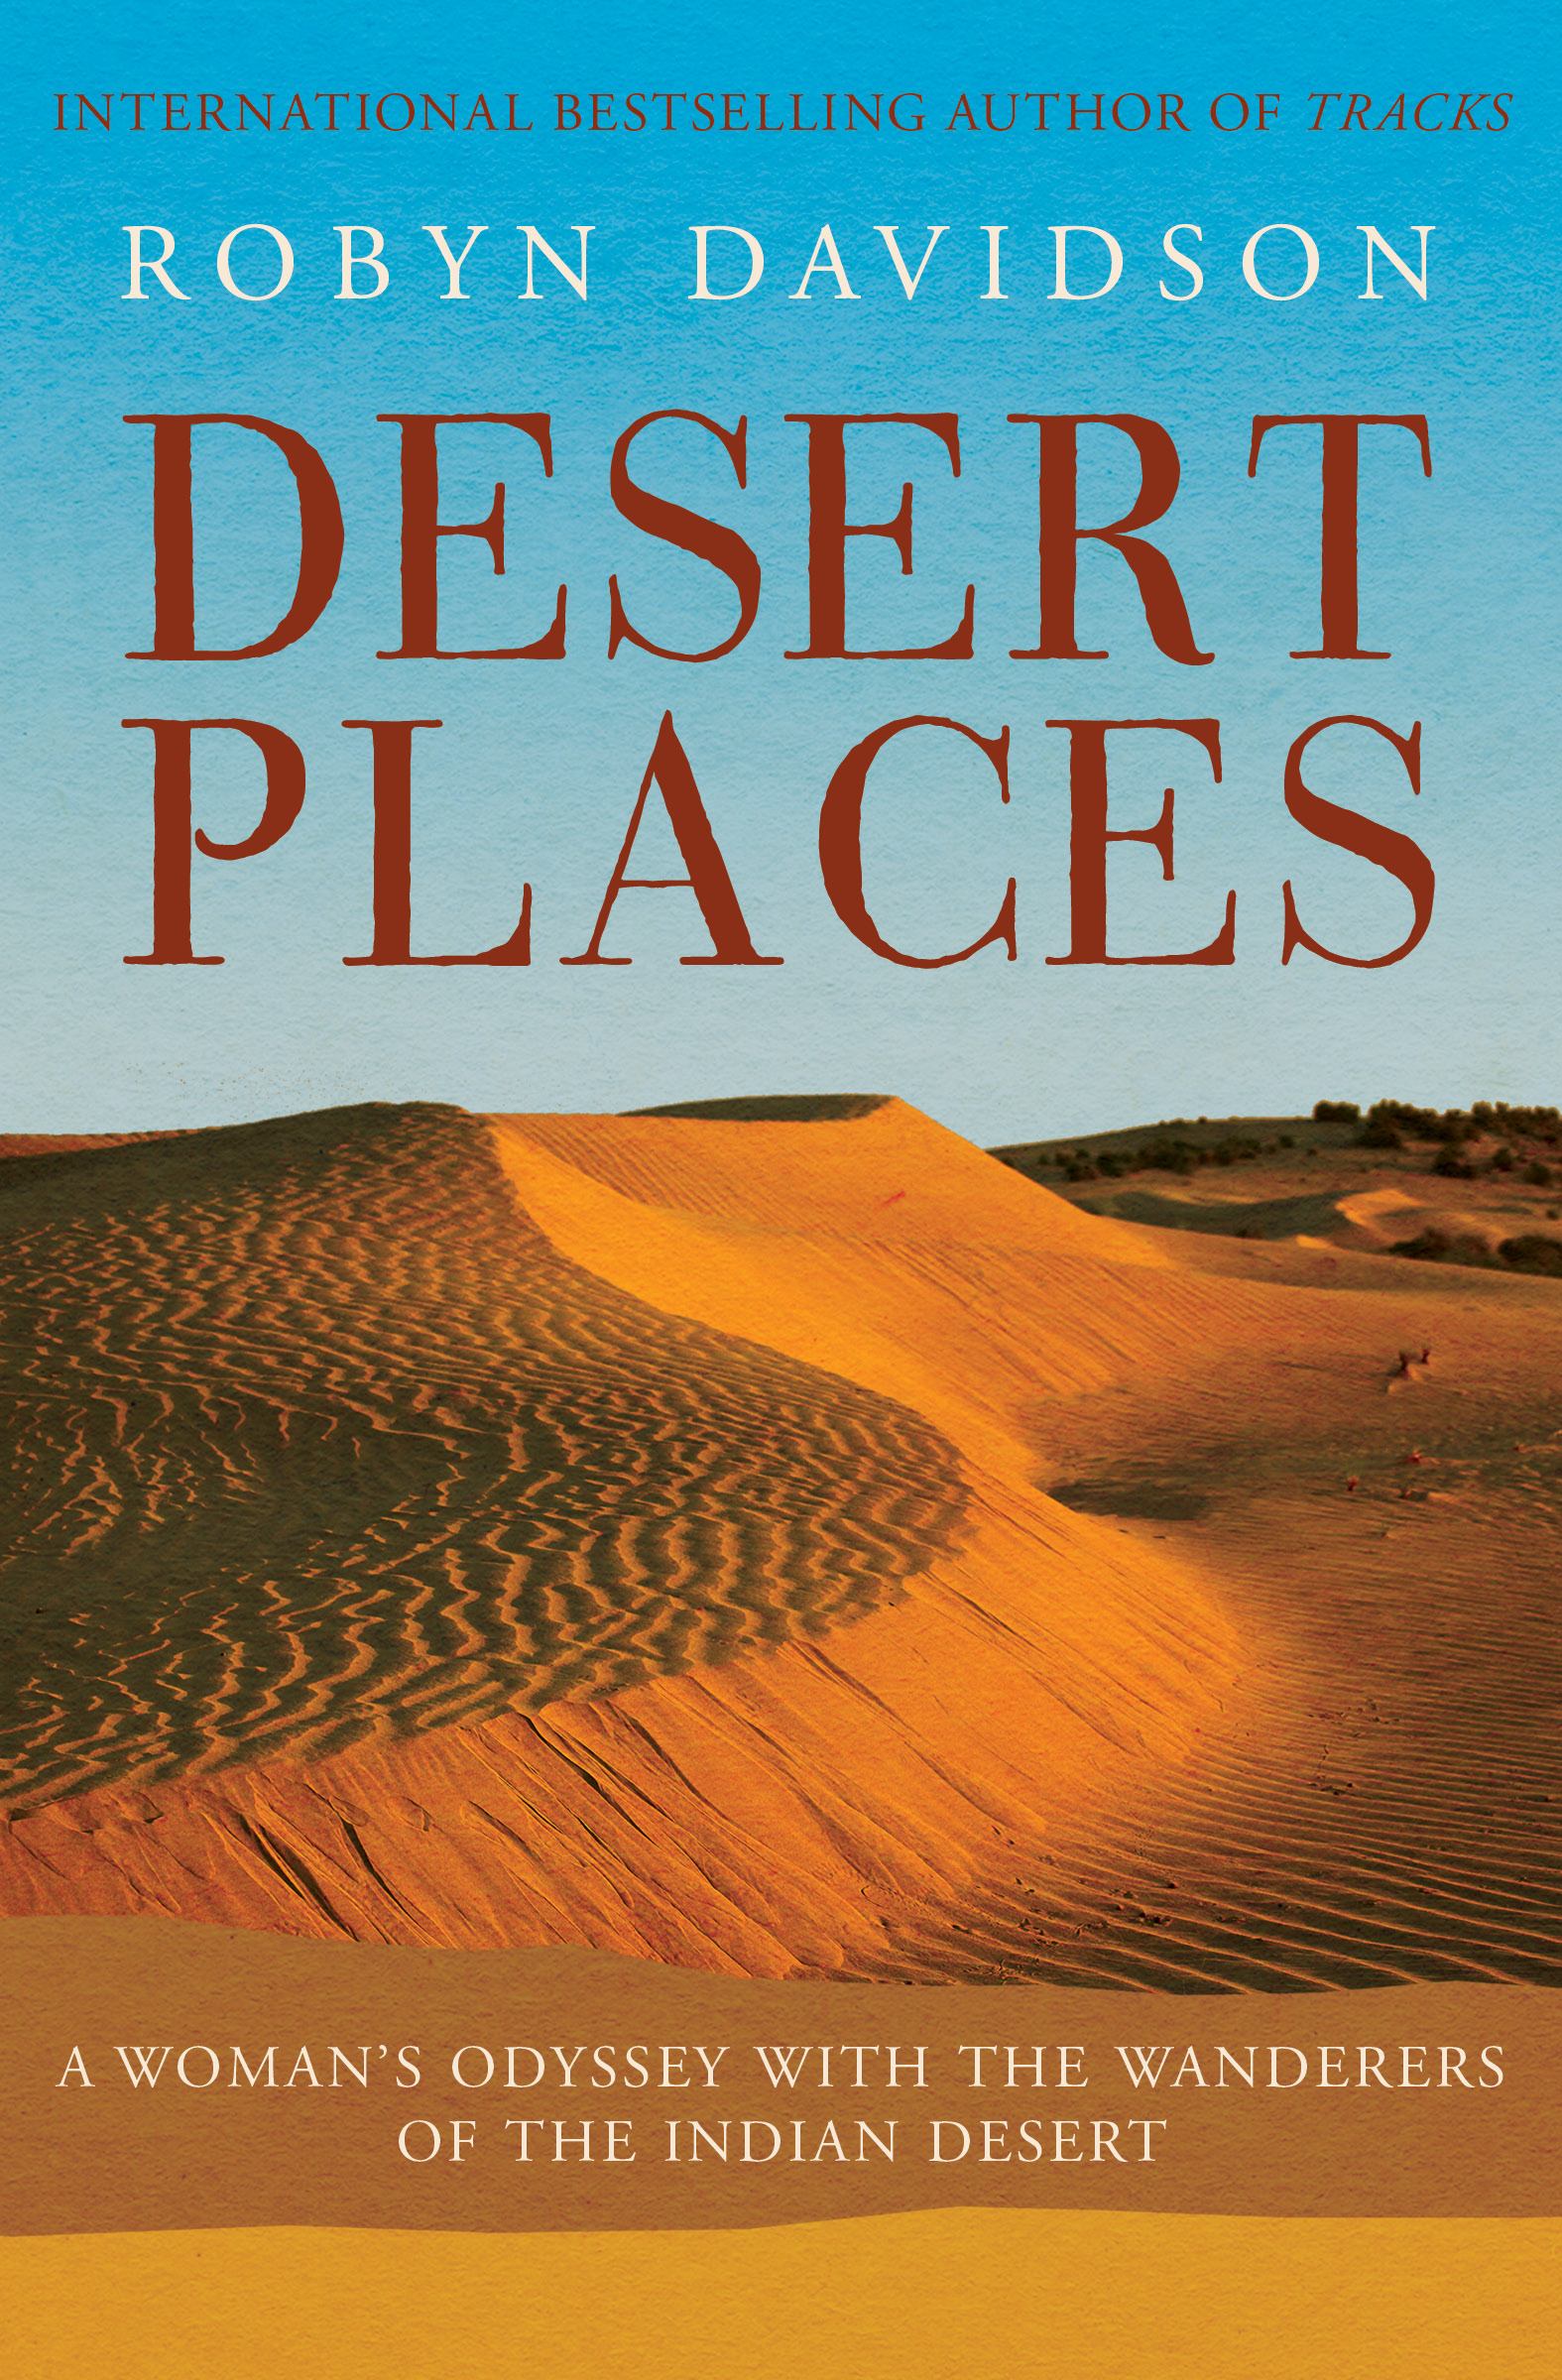 Desert Places A Woman's Odyssey with the Wanderers of the Indian Desert cover image